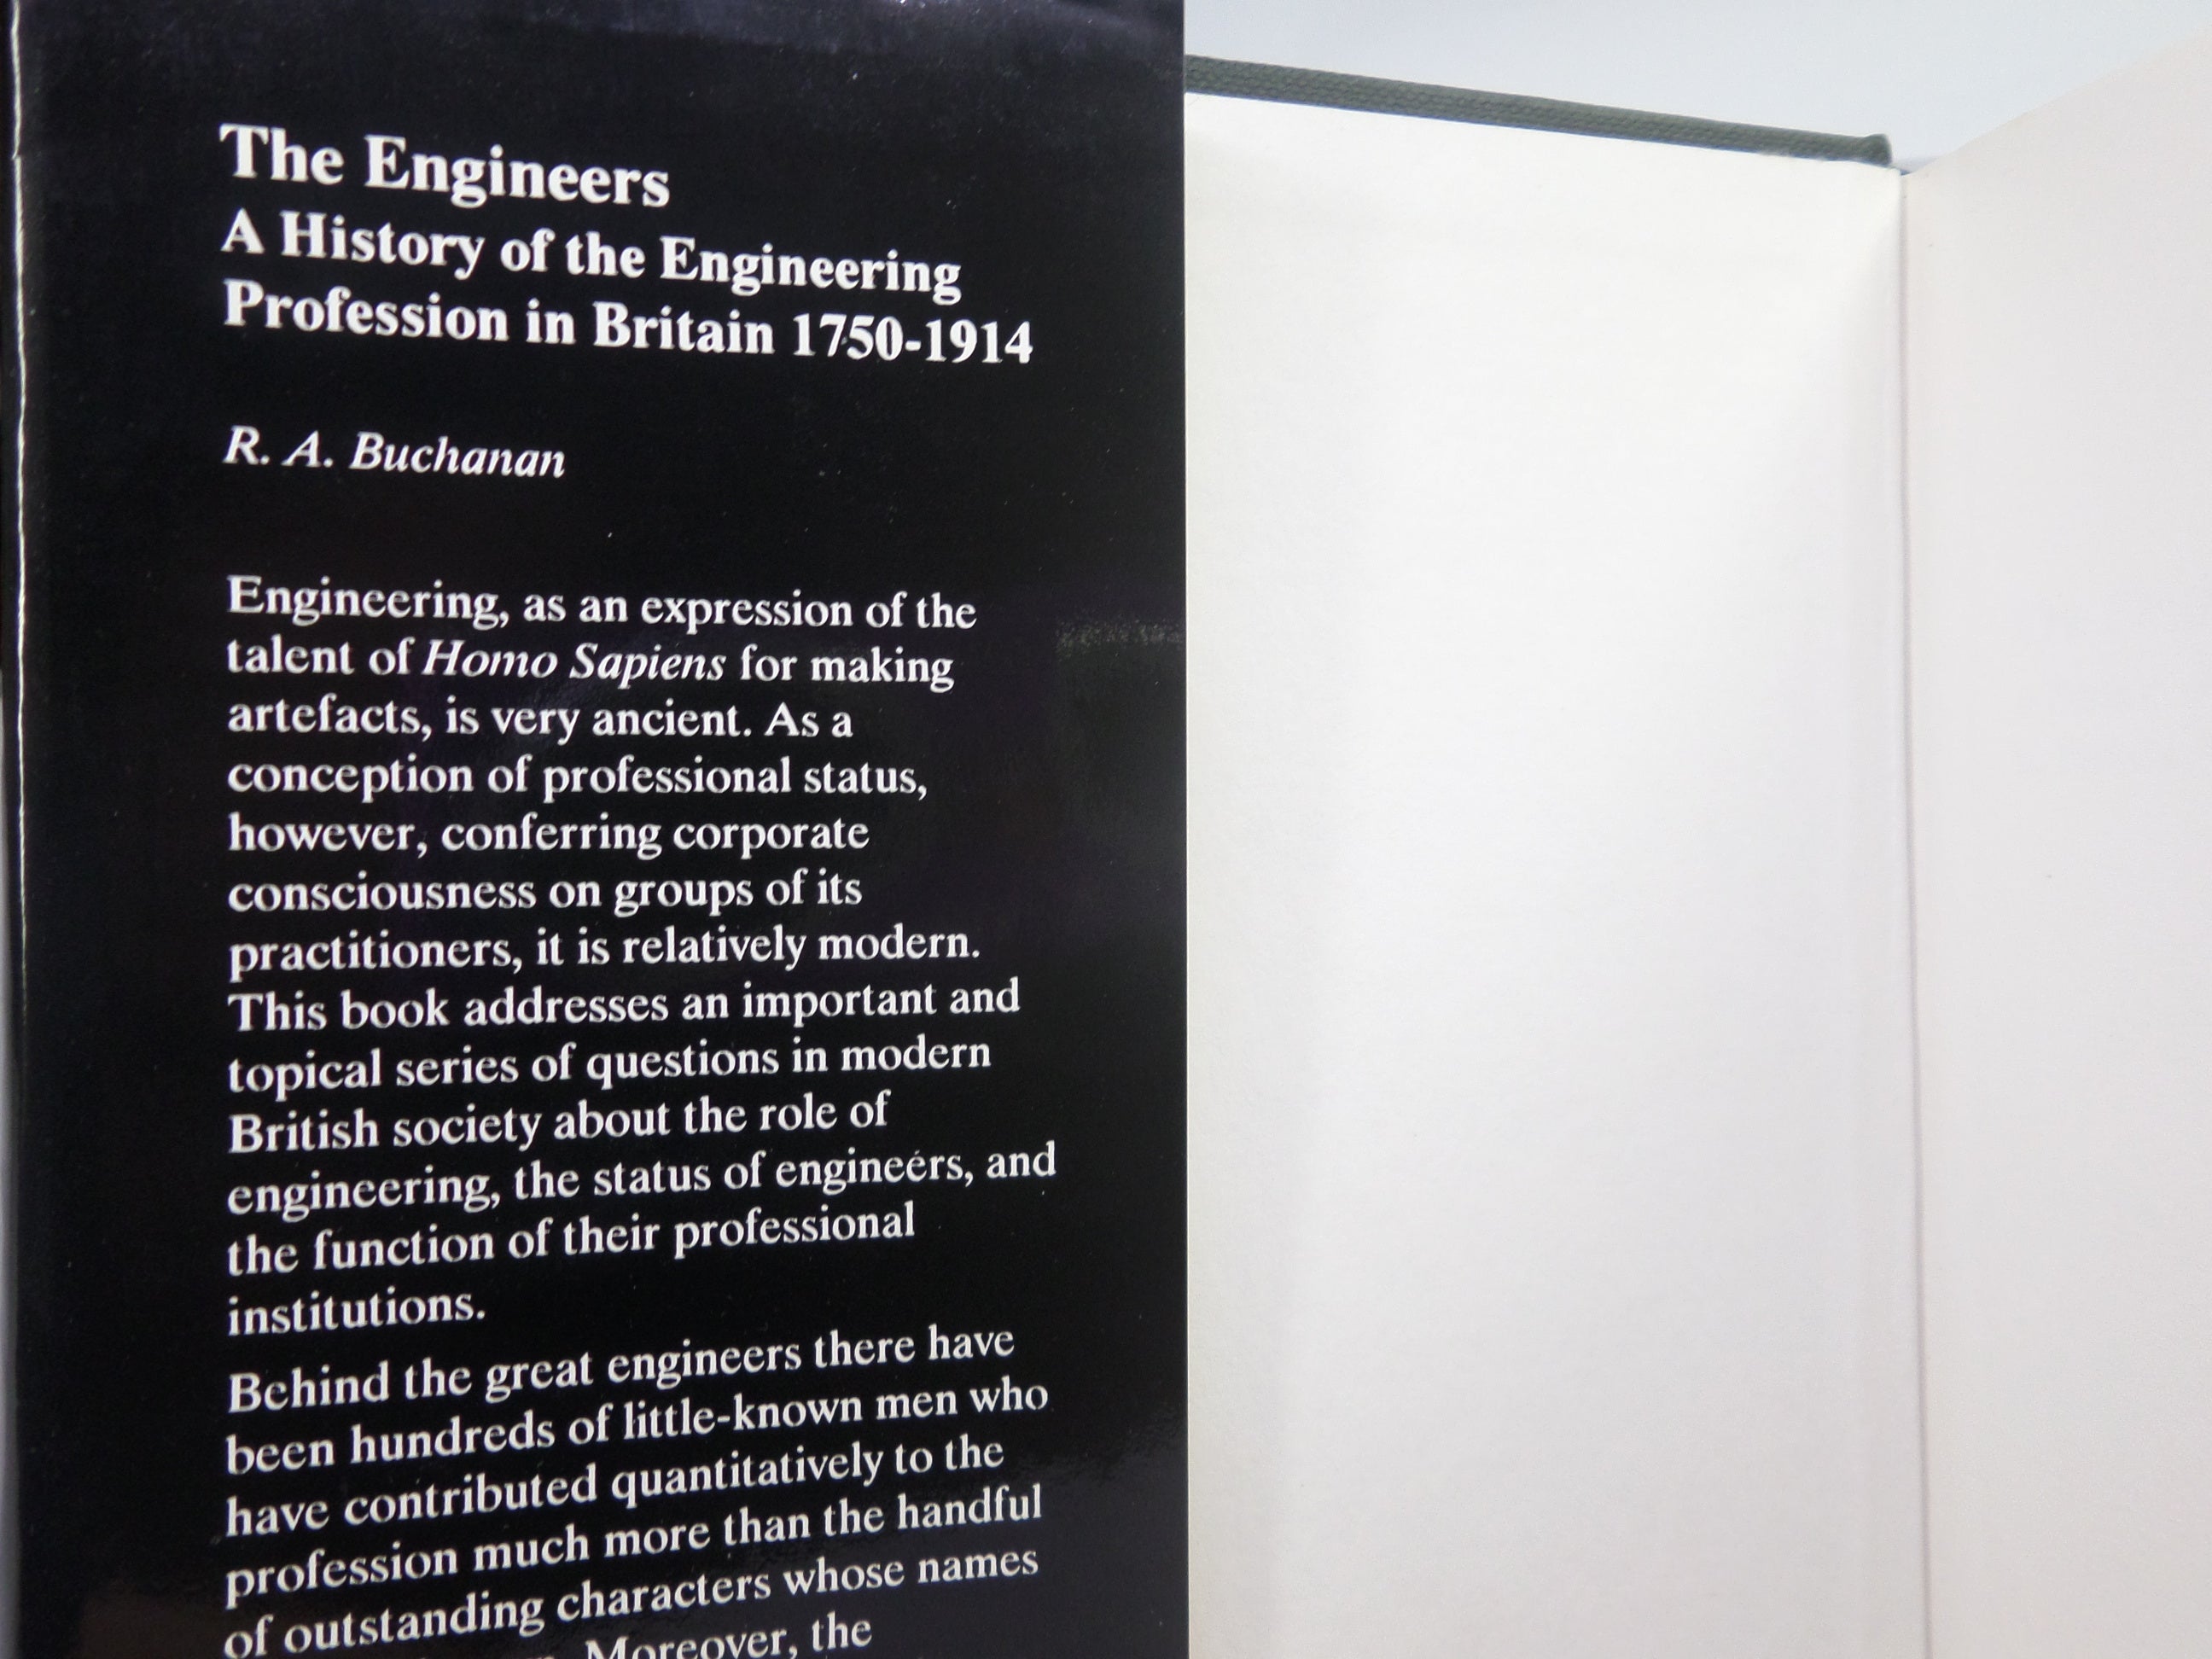 THE ENGINEERS: A HISTORY OF THE ENGINEERING PROFESSION IN BRITAIN, 1750-1914